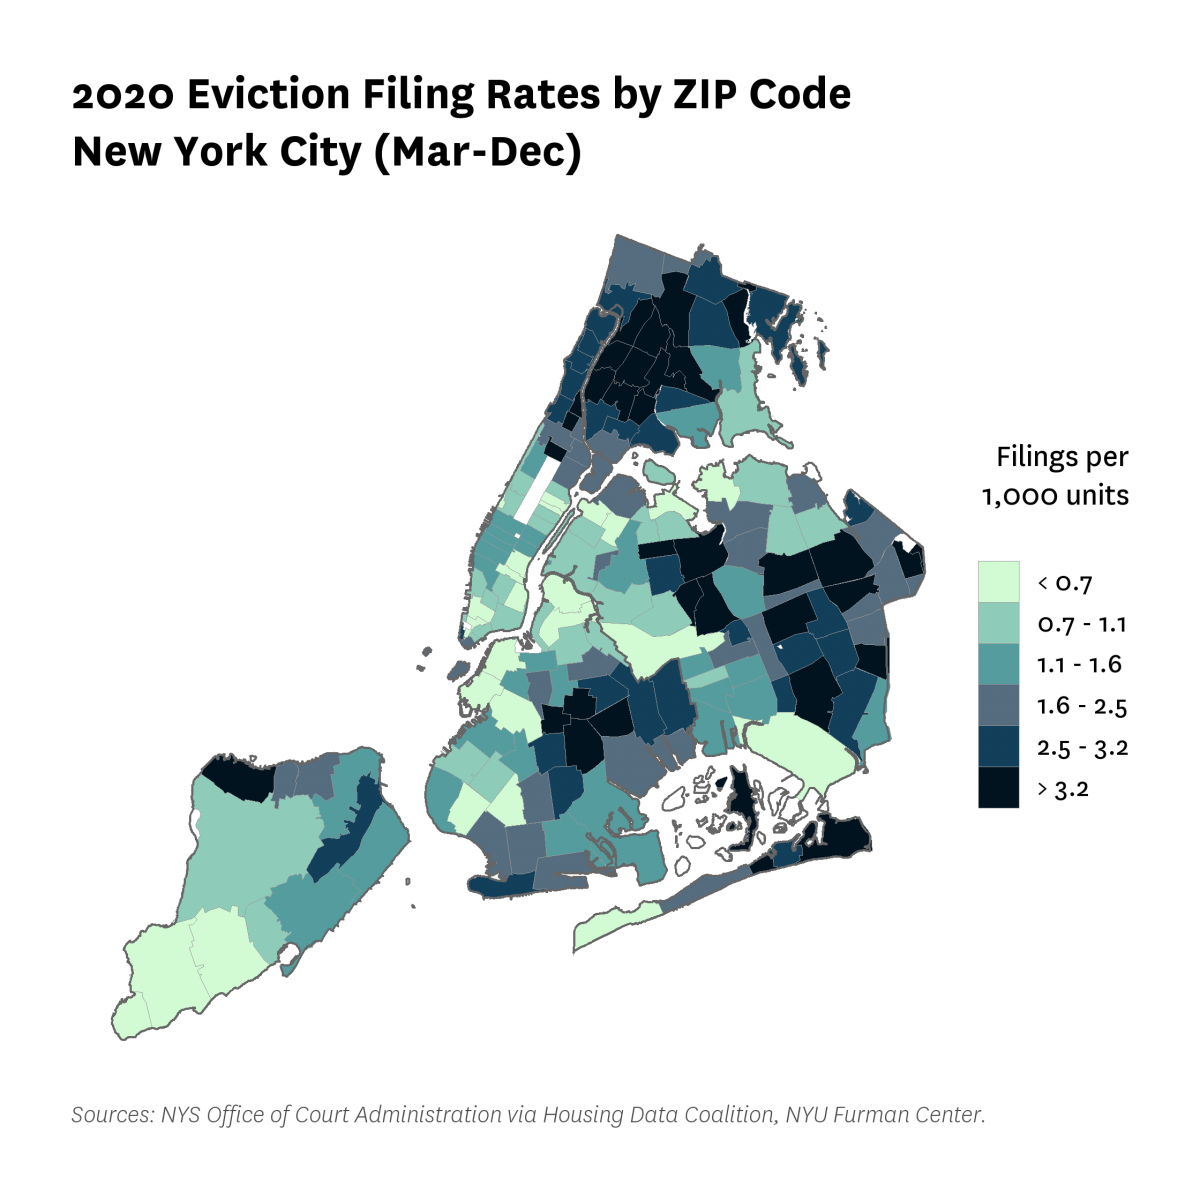 Map showing the 2020 eviction filing rates by zip code in New York City, March to December.